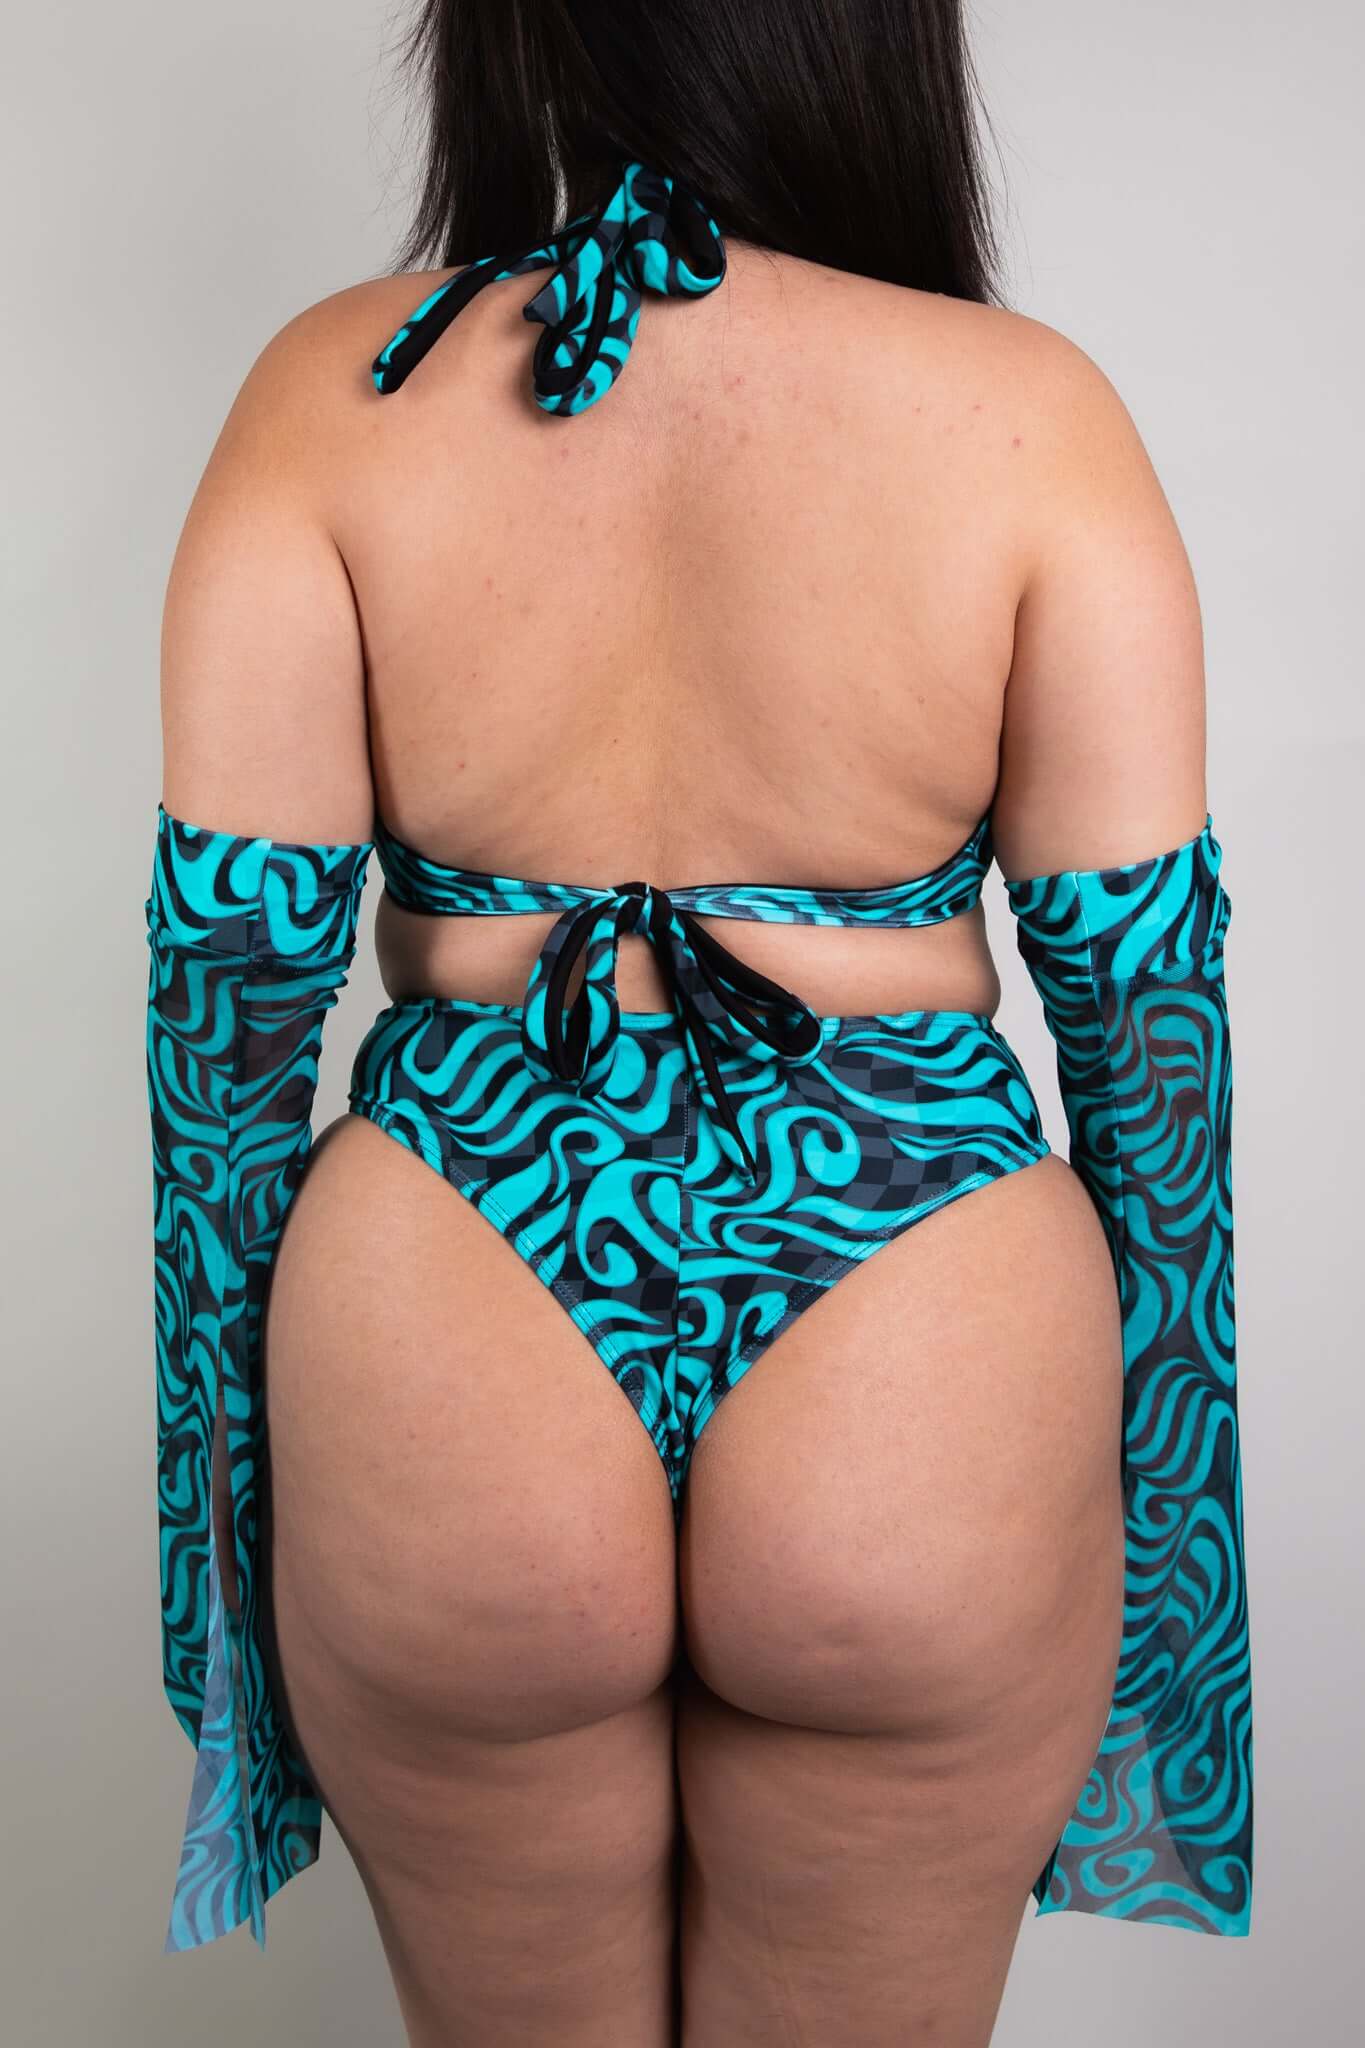 An up close photo of a woman wearing a blue and black swirled crop top and matching bikini bottoms. She is facing away from the camera.